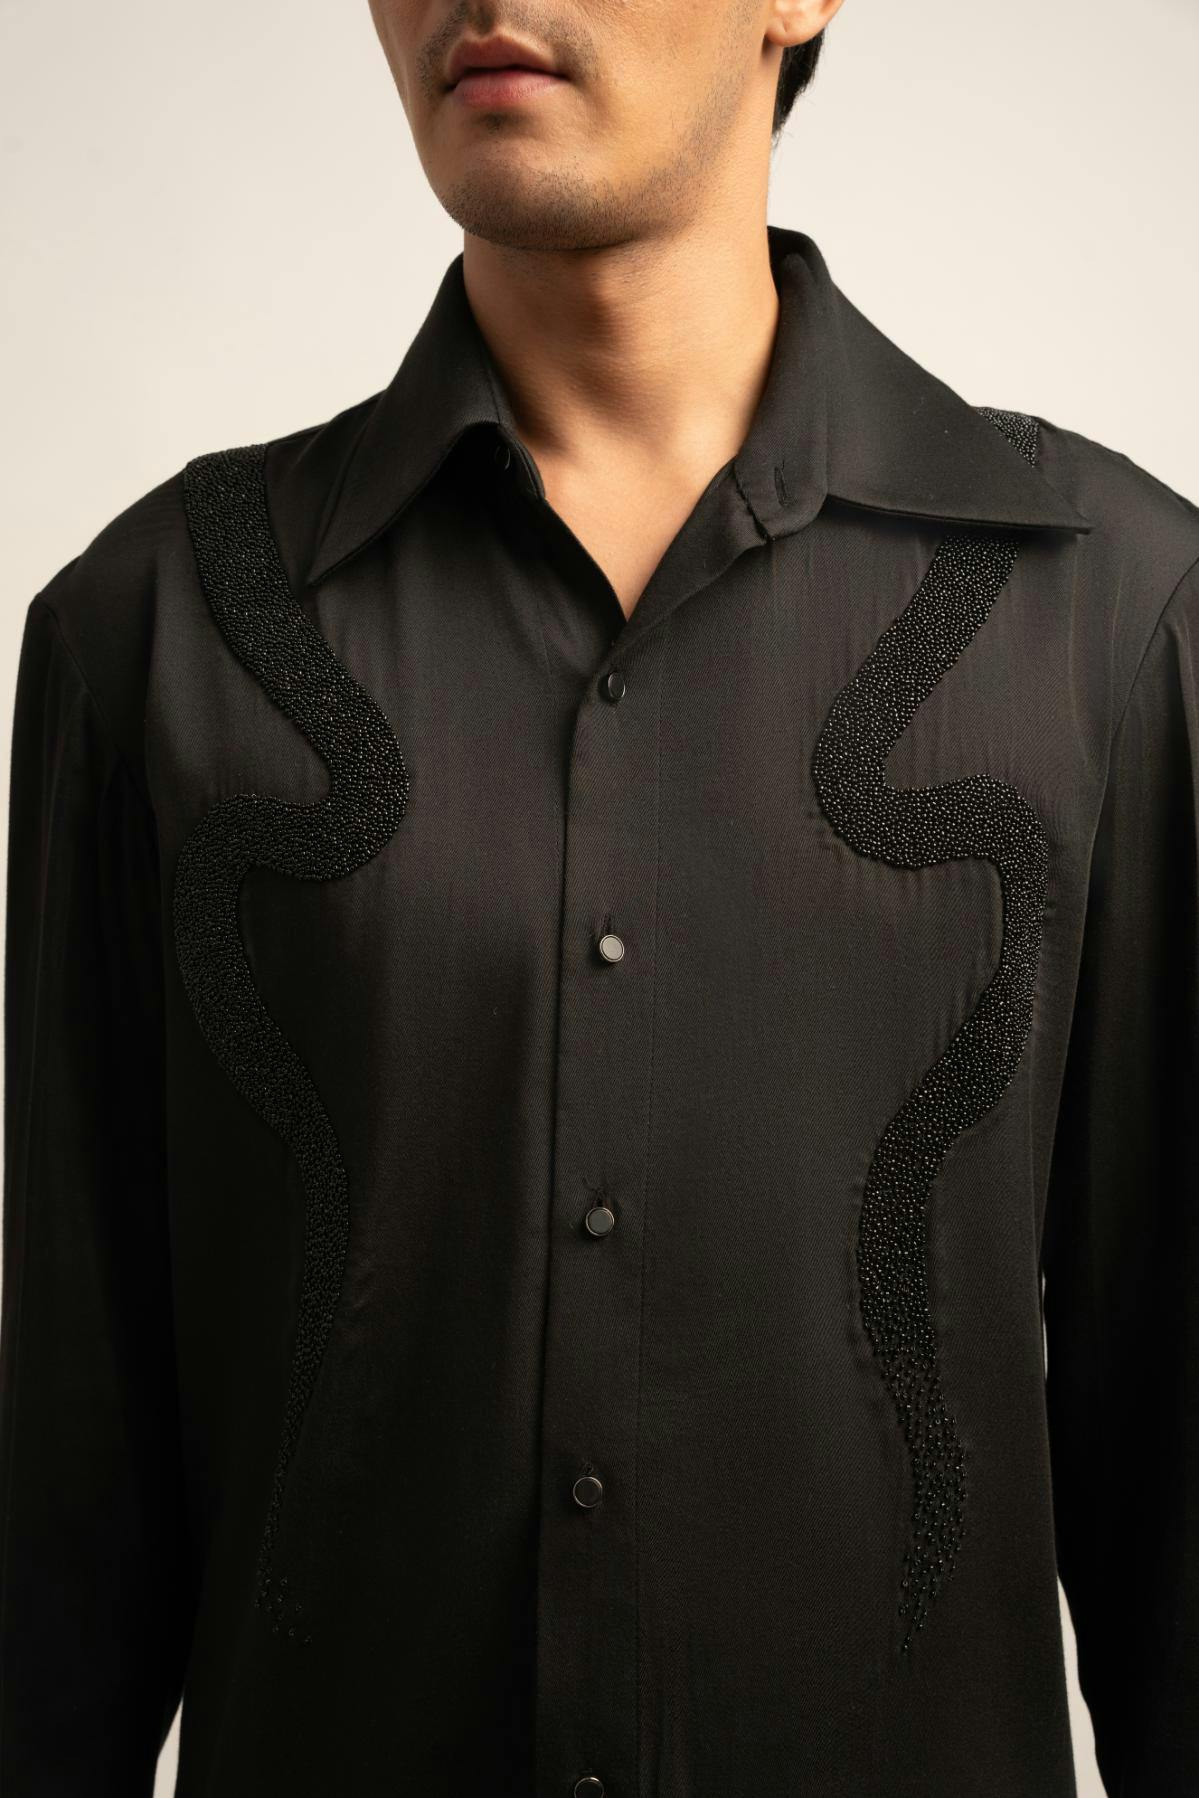 The Onyx Shirt, a product by Siddhant Agrawal Label